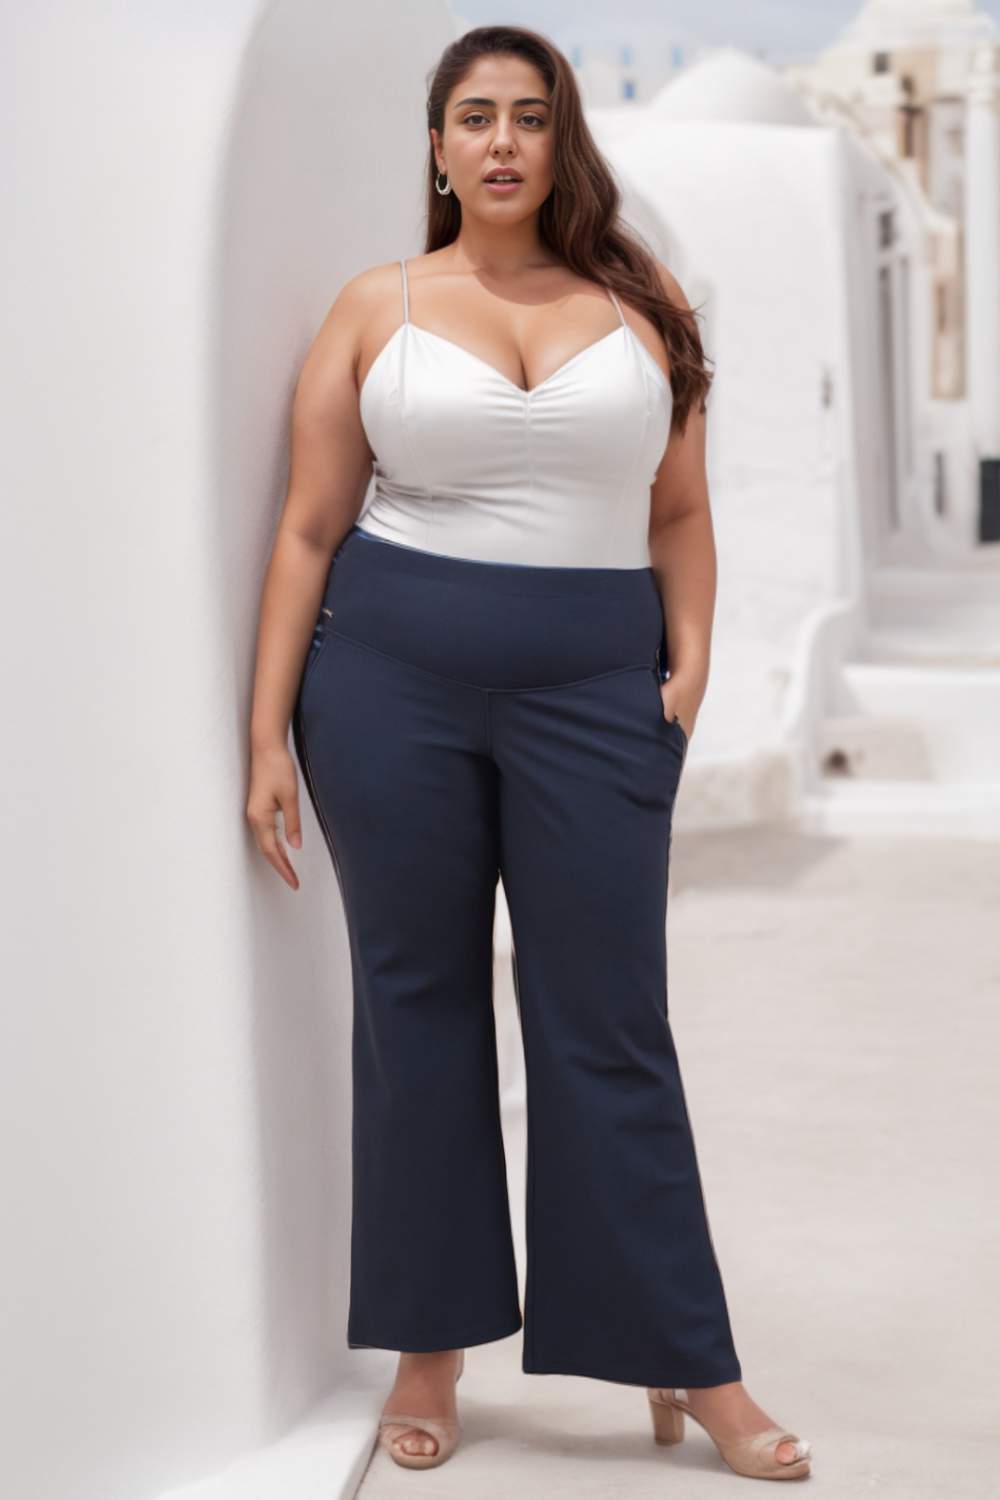  LANREN Women's Sexy Body Shaping Tummy Tuck Pants High Waist  Pants Postpartum Tummy Tuck Tight Pants Seamless Flat-Angle Plus Size  (Color : Skin Color, Size : X-Small) : Clothing, Shoes 